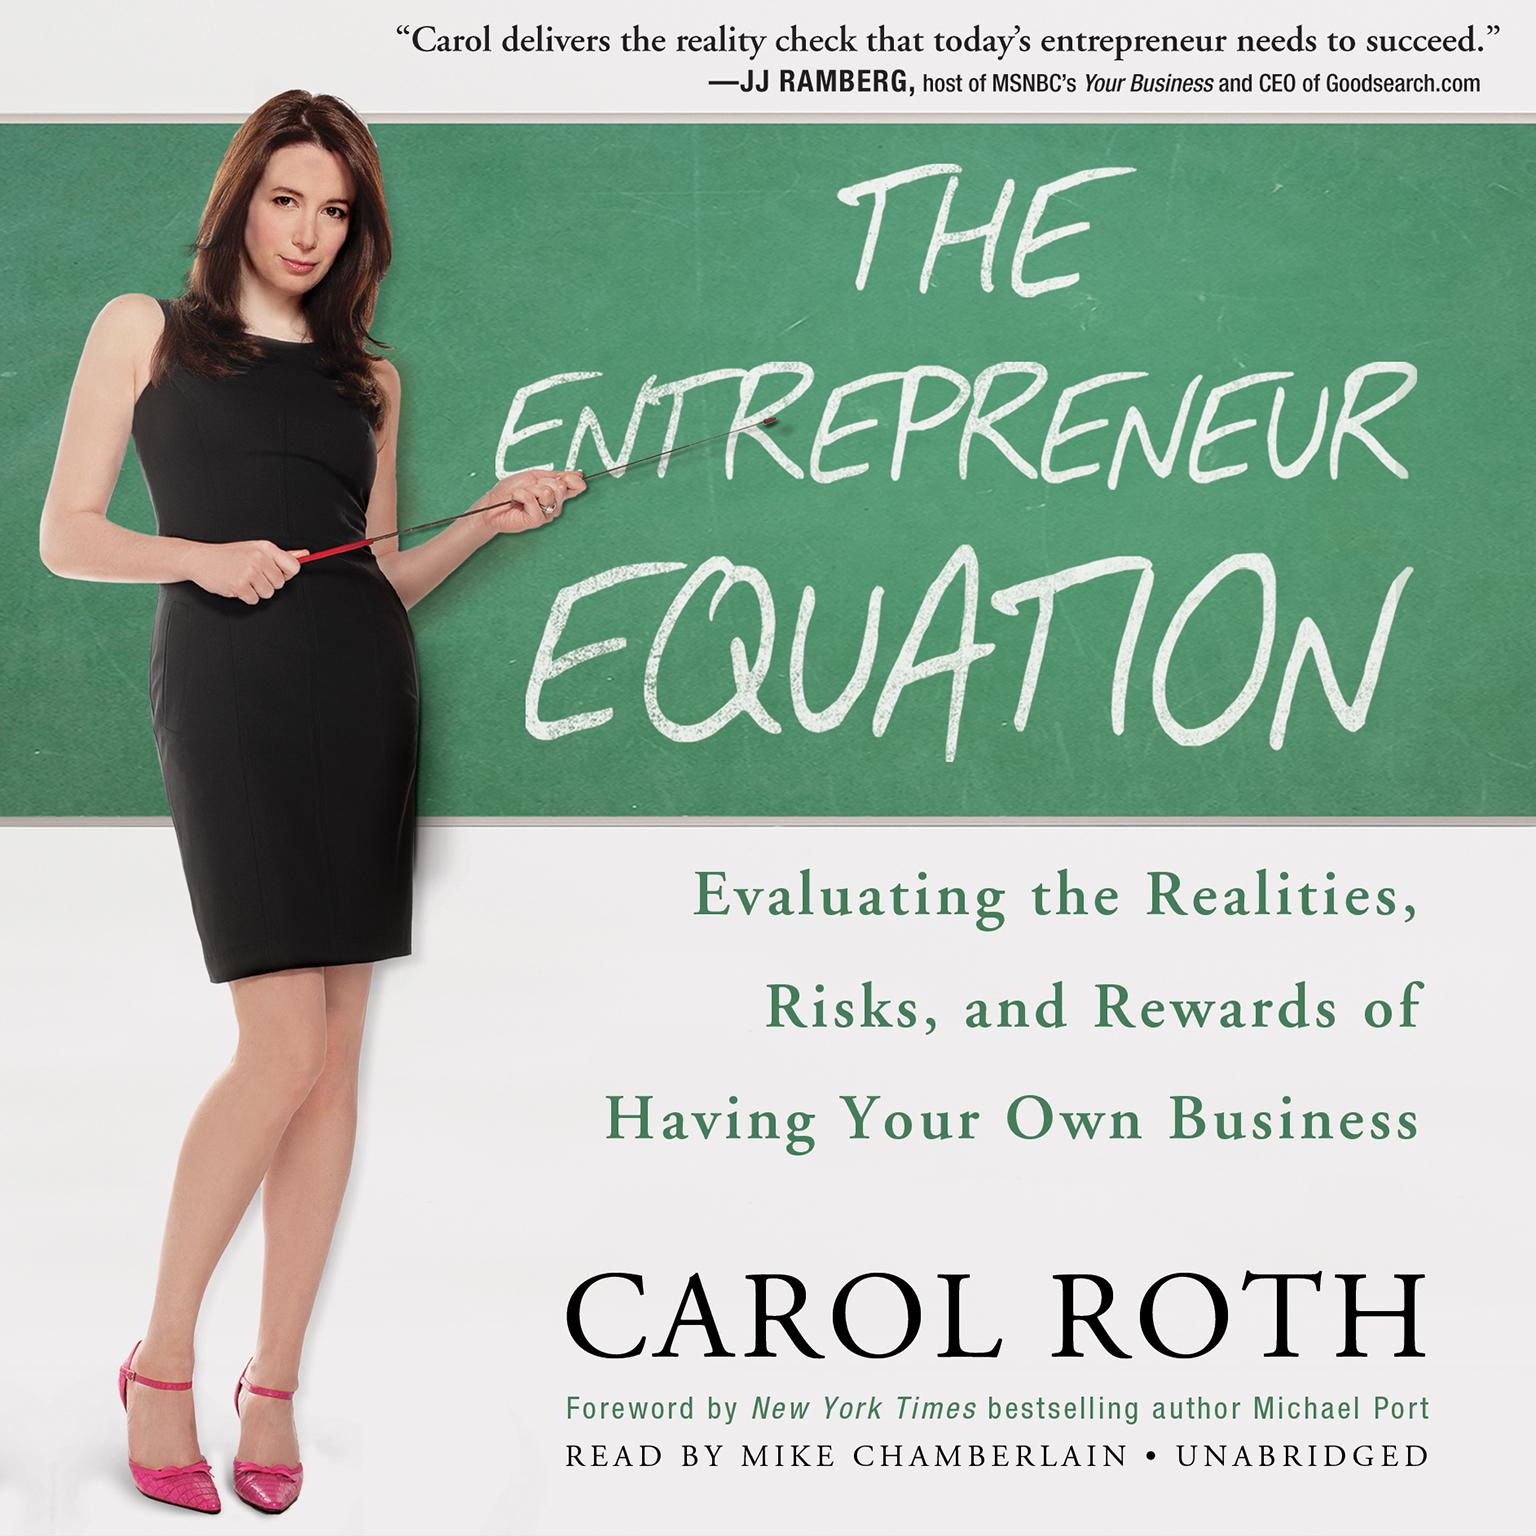 The Entrepreneur Equation: Evaluating the Realities, Risks, and Rewards of Having Your Own Business Audiobook, by Carol Roth